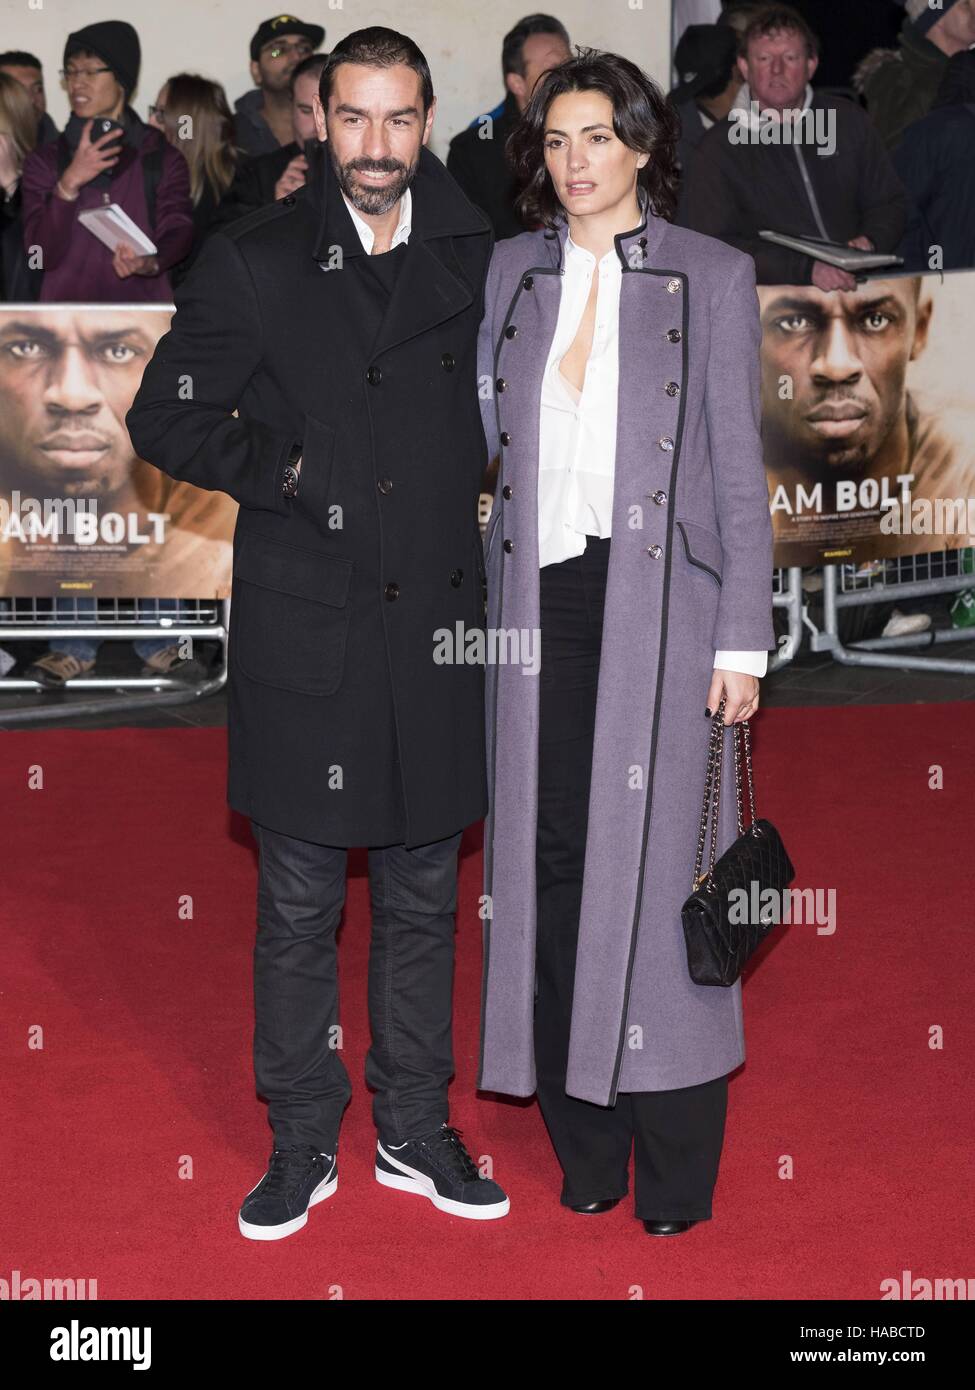 London, Grossbritannien. 28th Nov, 2016. Robert Pires and Jessica Lemarie attend ‚Äò I am Bolt ‚Äô World Premiere at Leicester Square in London, England (28/11/2016). | Verwendung weltweit © dpa/Alamy Live News Stock Photo